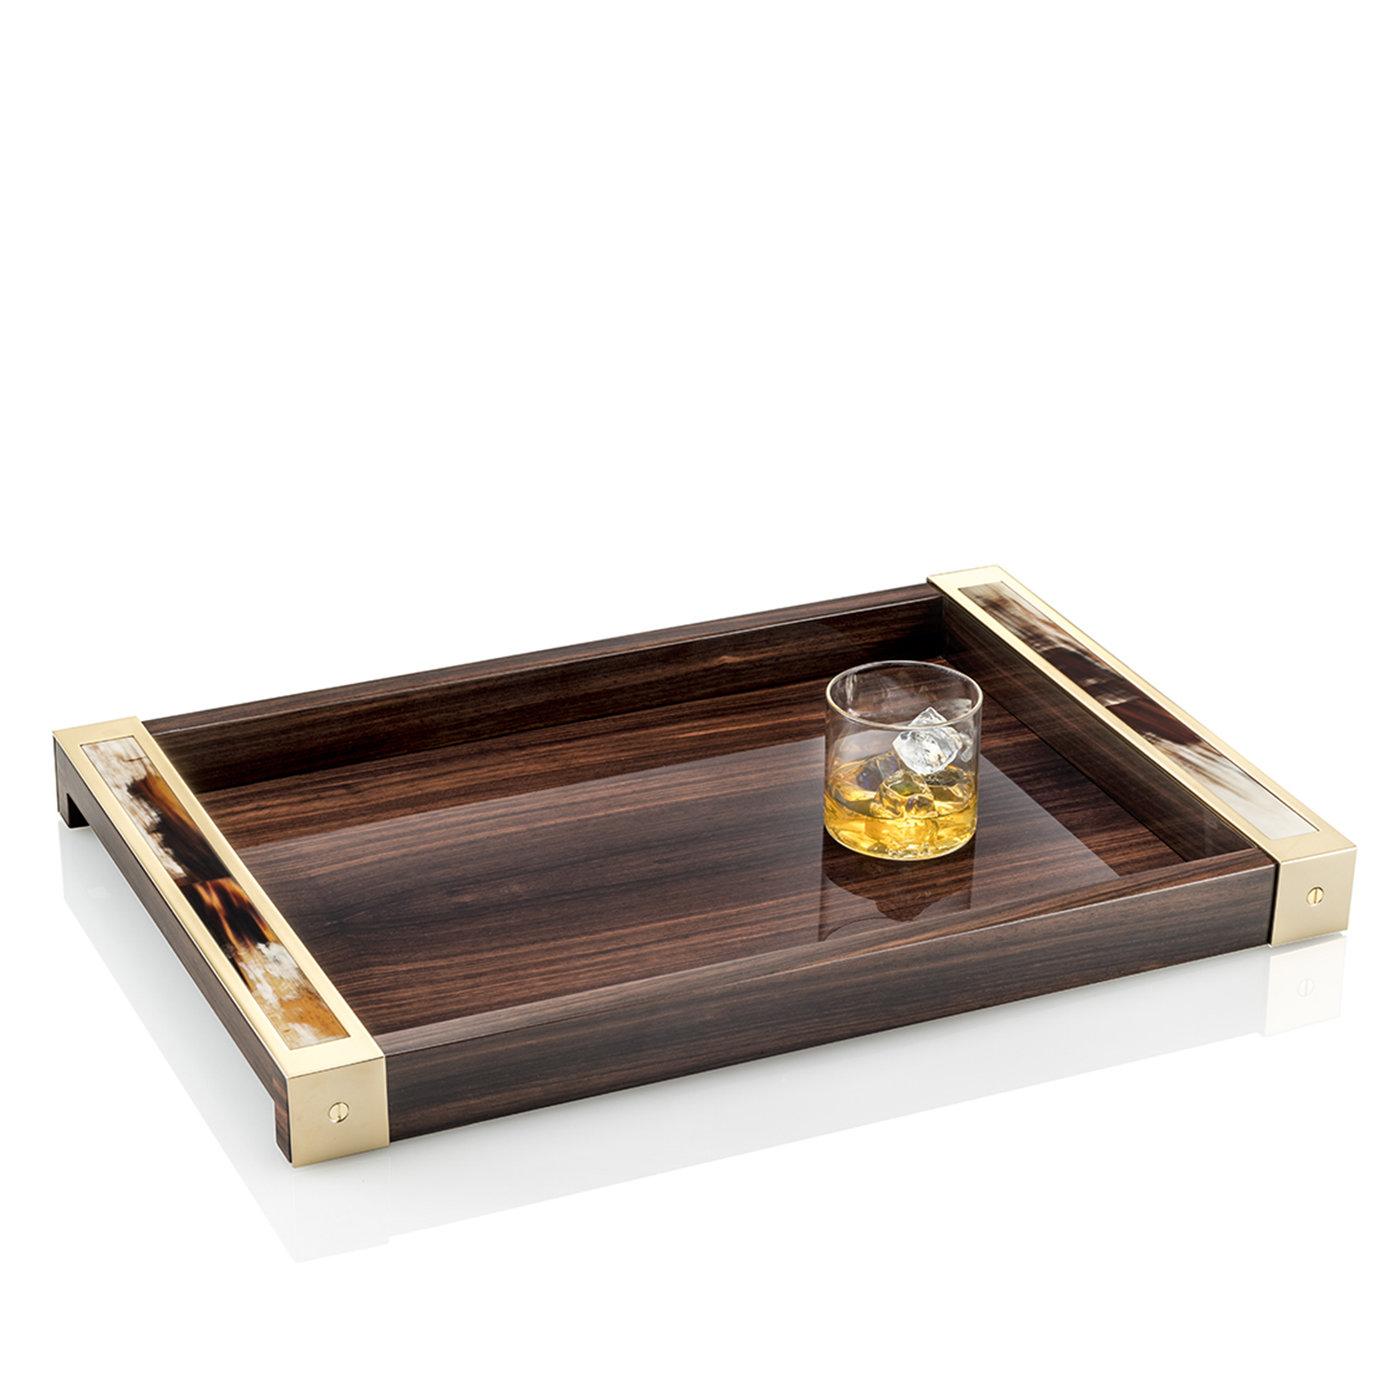 Mida, the luxury tray you can also use as a design item to enrich your environment. The structure is in sucupira taupe with opaque horn details and burnished brass. The exposed screws in 24K gold plated brass donate this wonderful tray the details